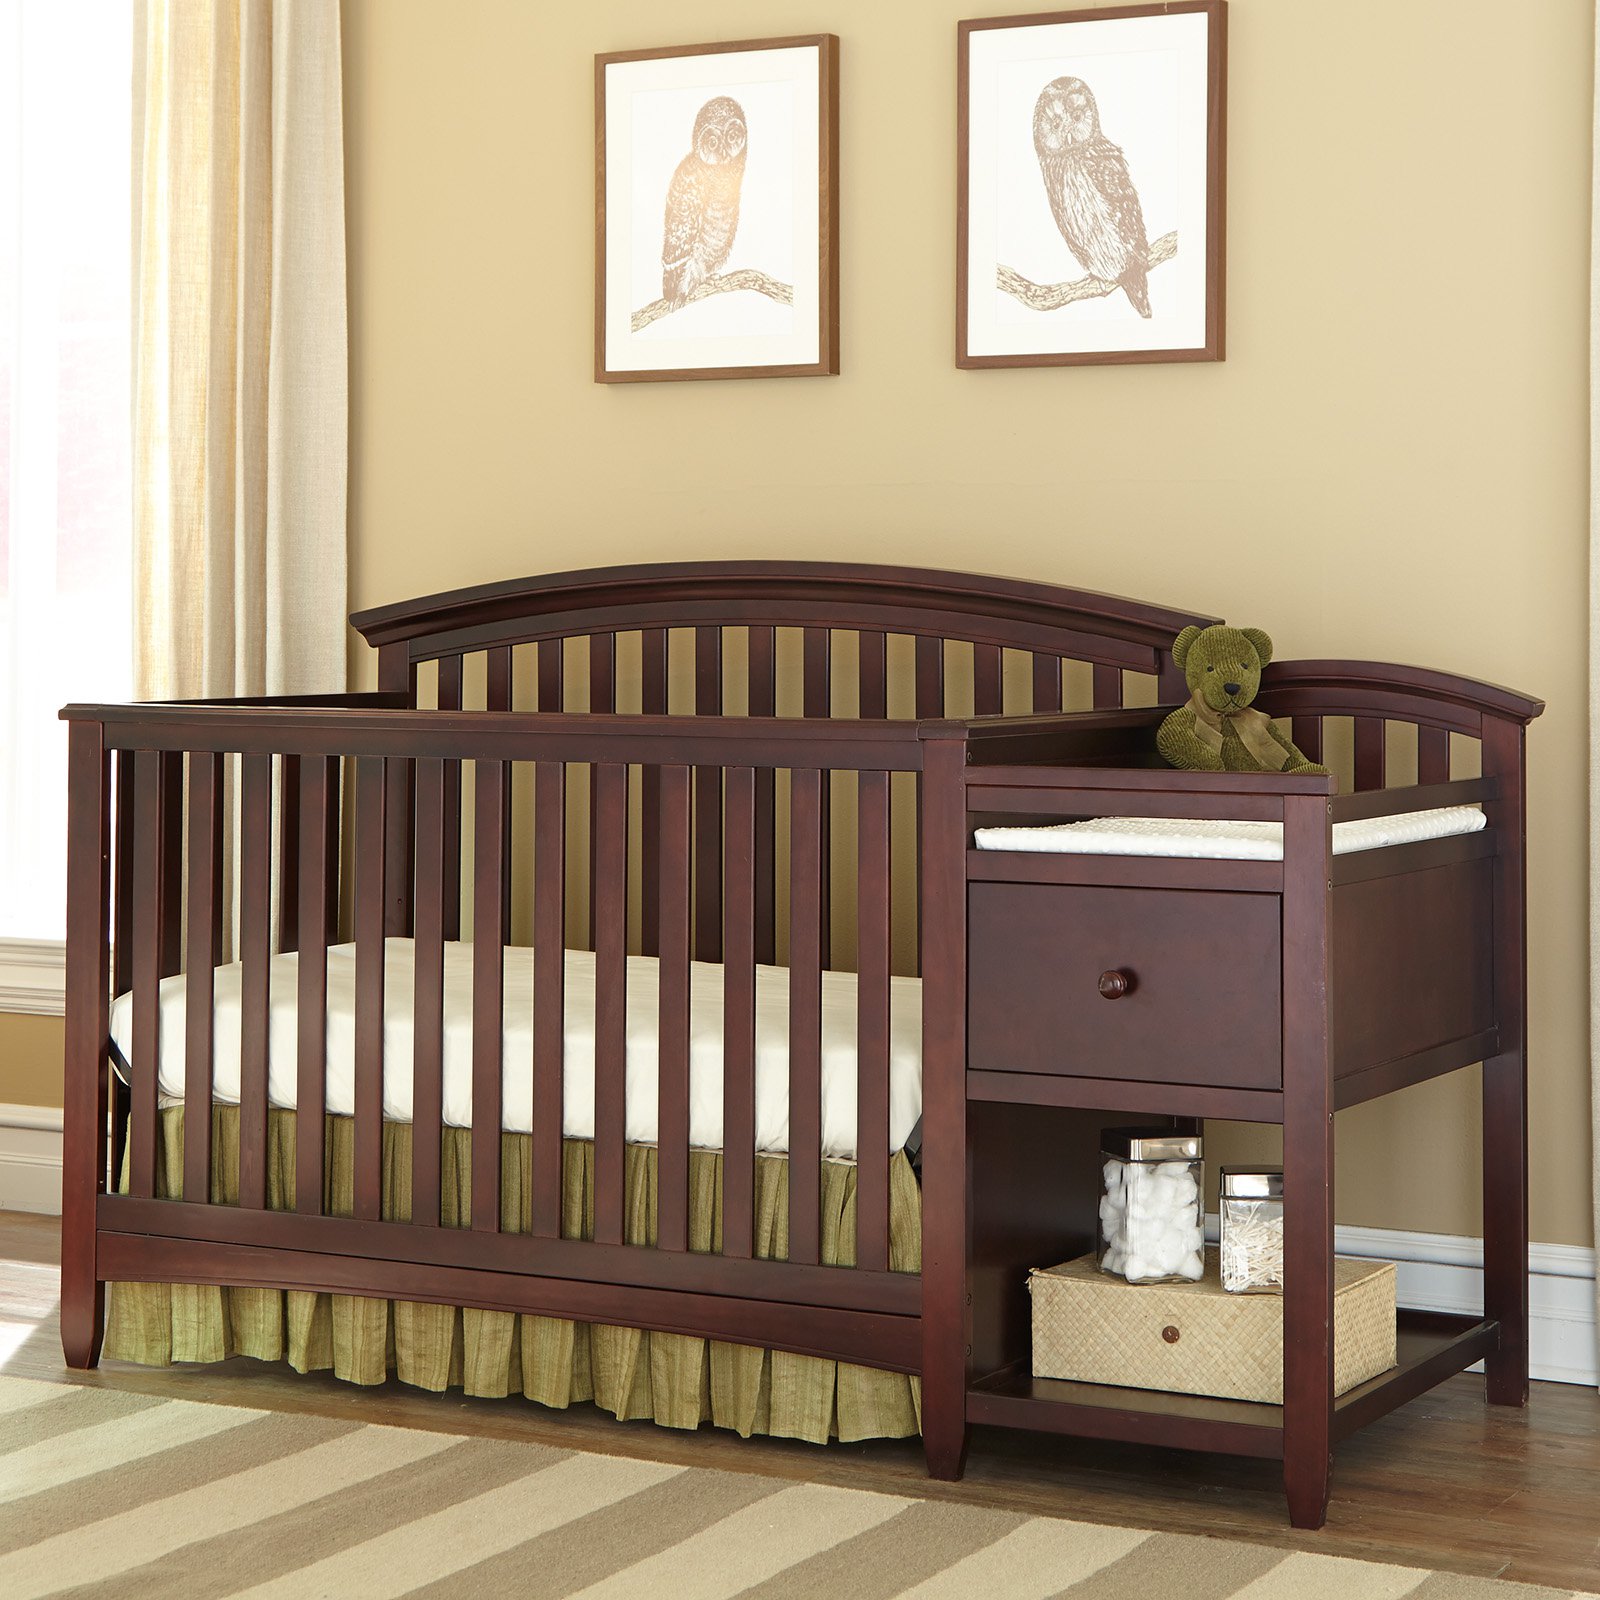 Imagio Baby Montville 4-in-1 Convertible Crib and Changer with Pad, Chocolate Mist - image 2 of 2